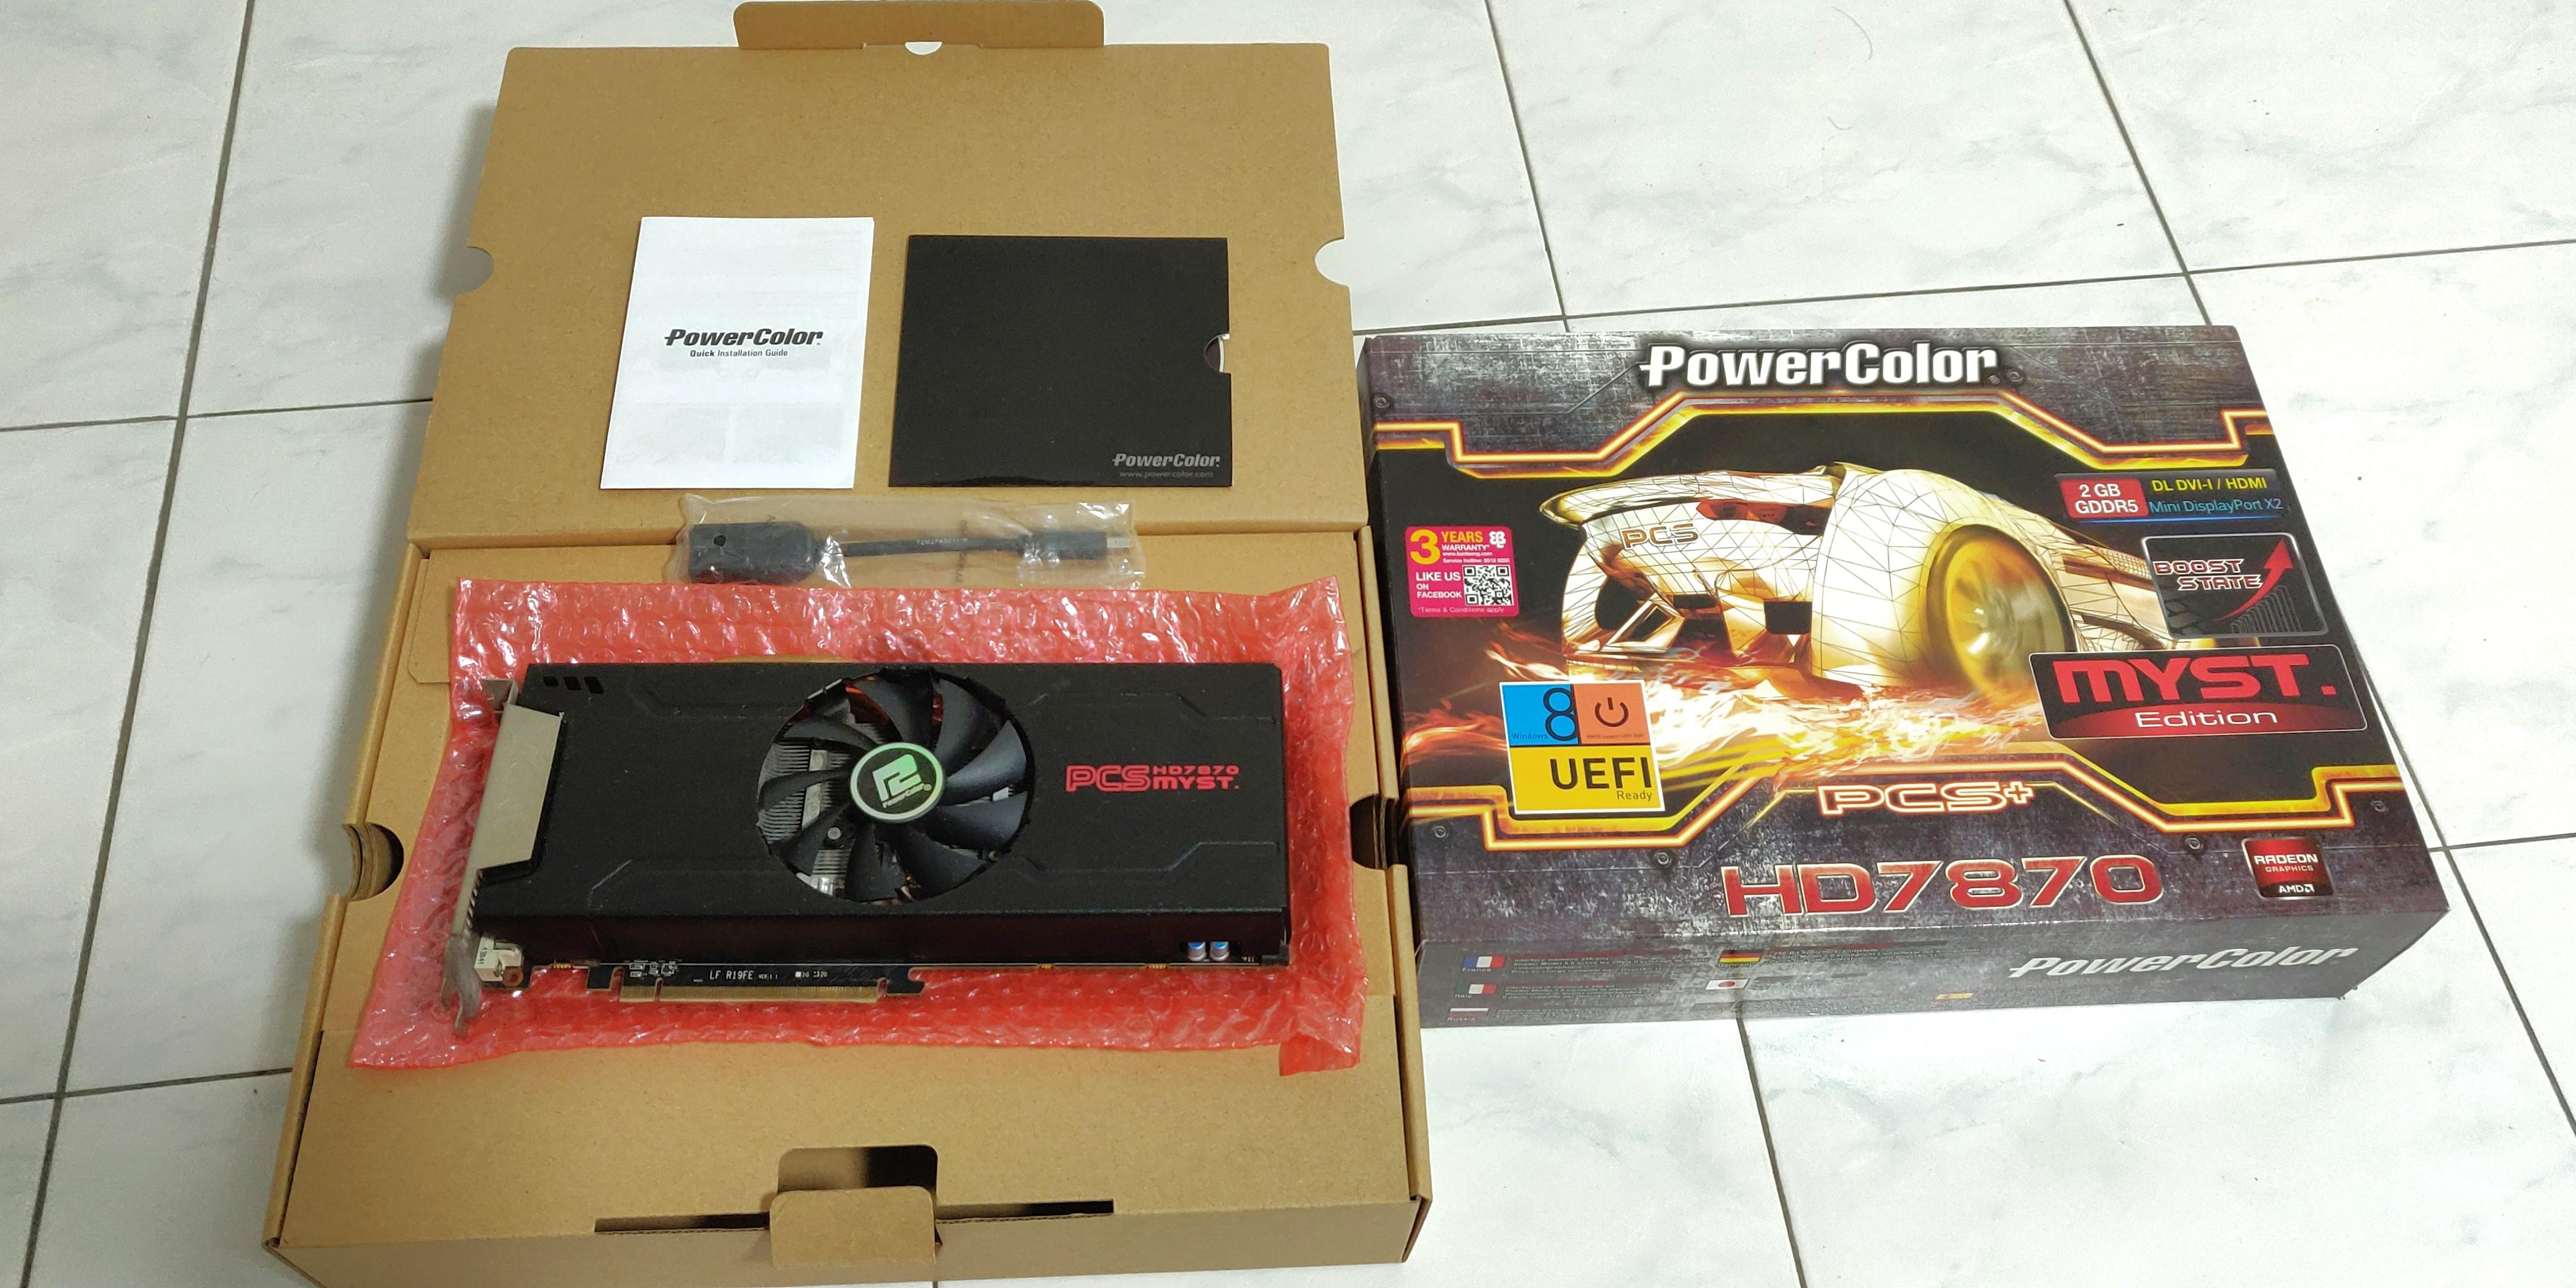 Amd Radeon 7870 Myst Edition Electronics Computer Parts Accessories On Carousell